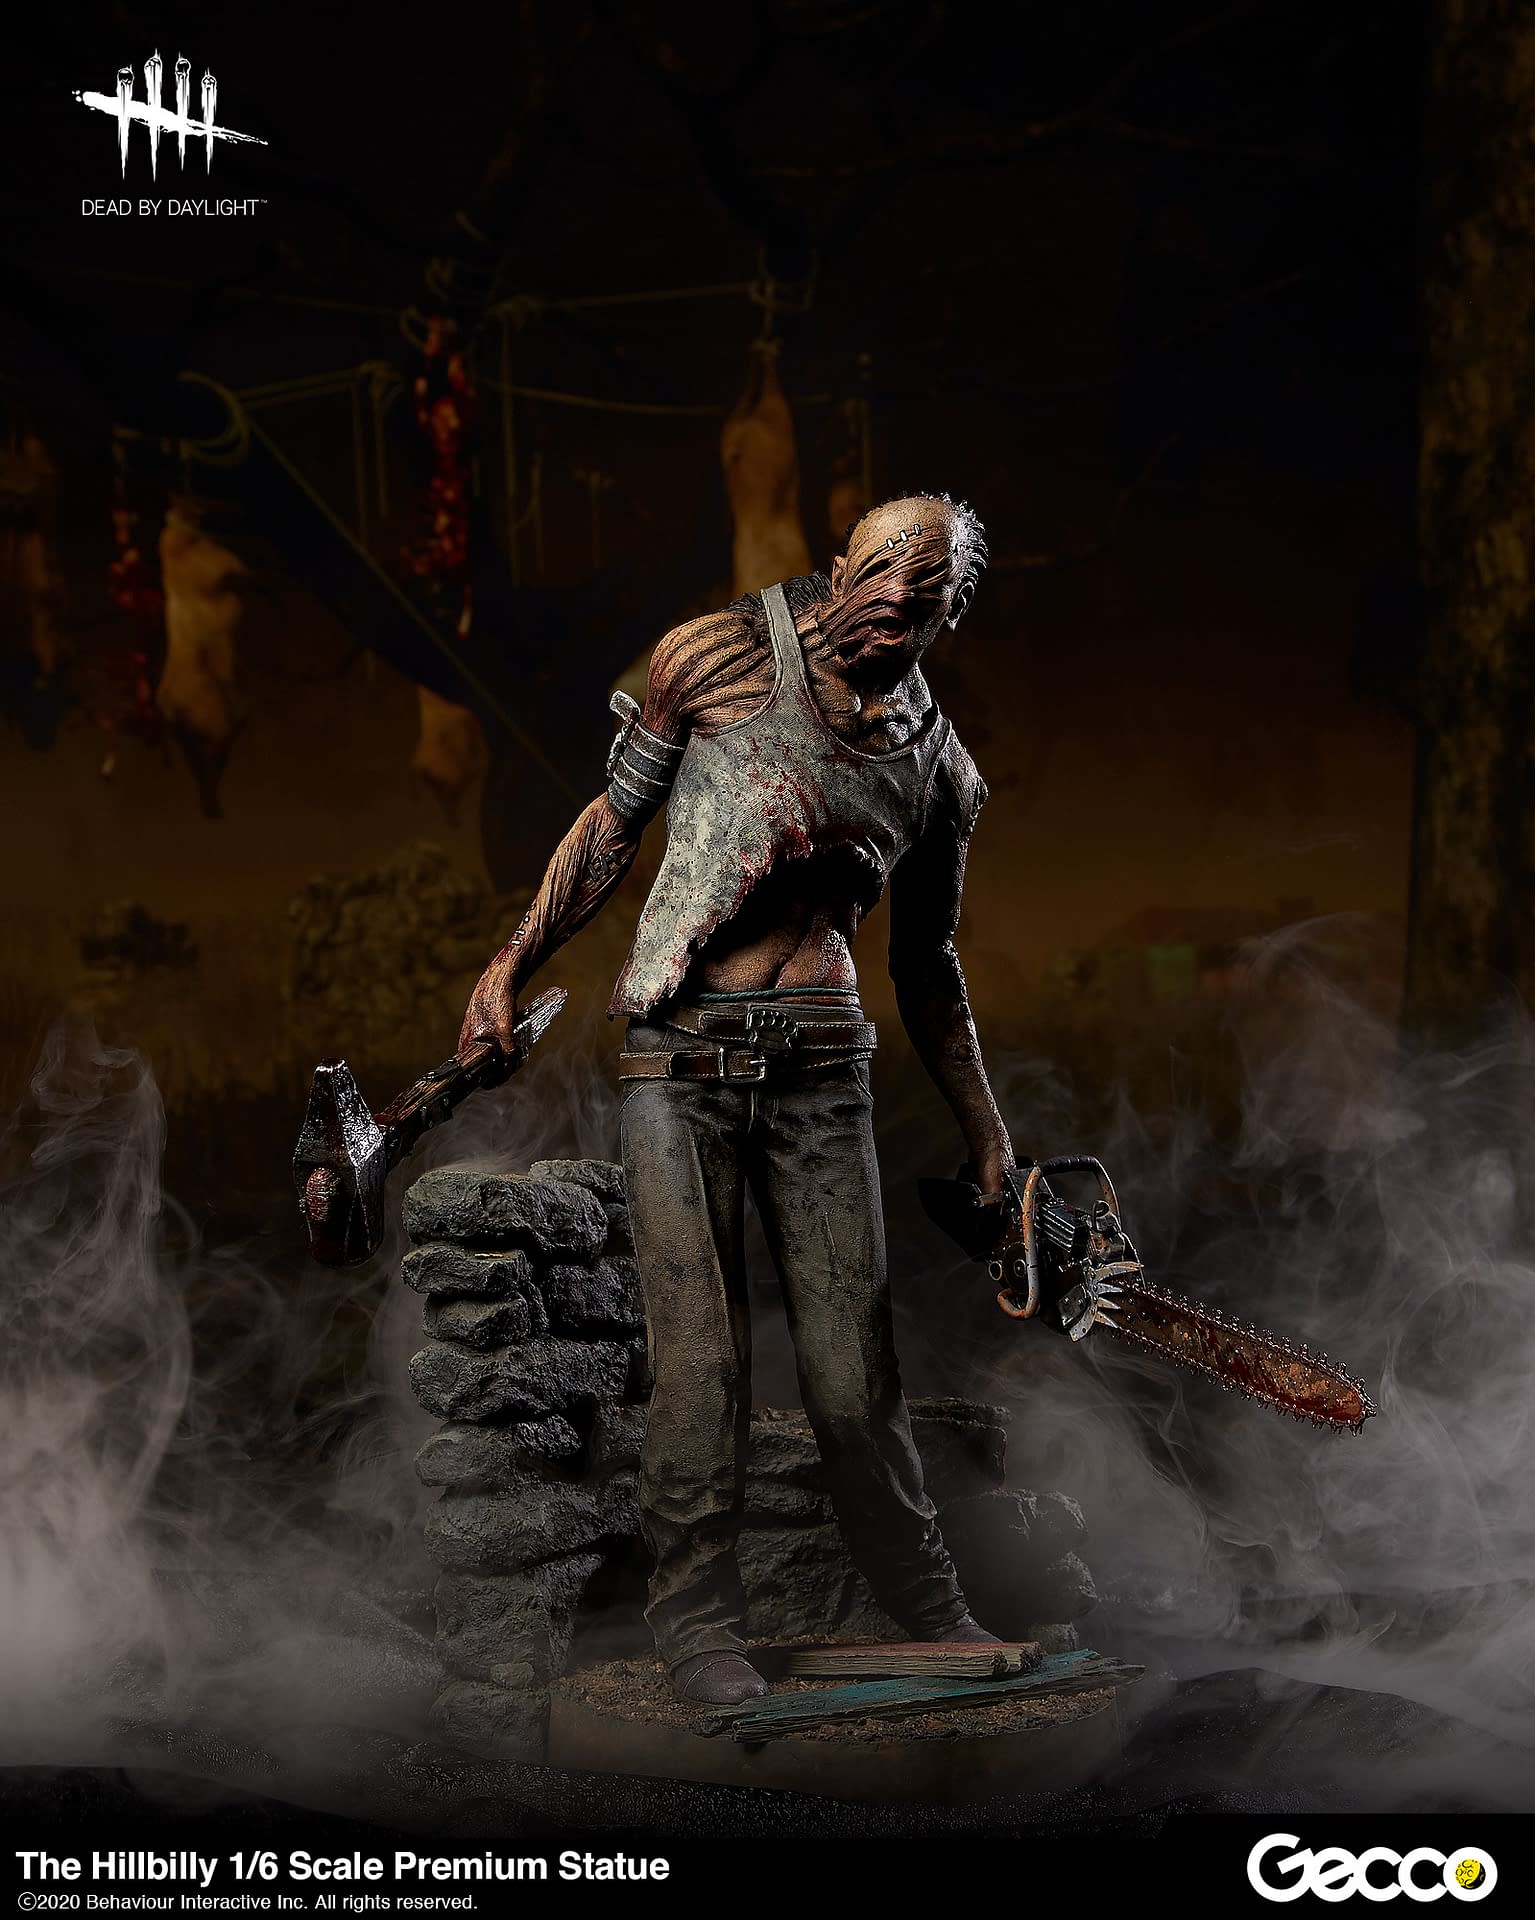 Gecco-Dead-by-Daylight-Hillbilly-Statue-001